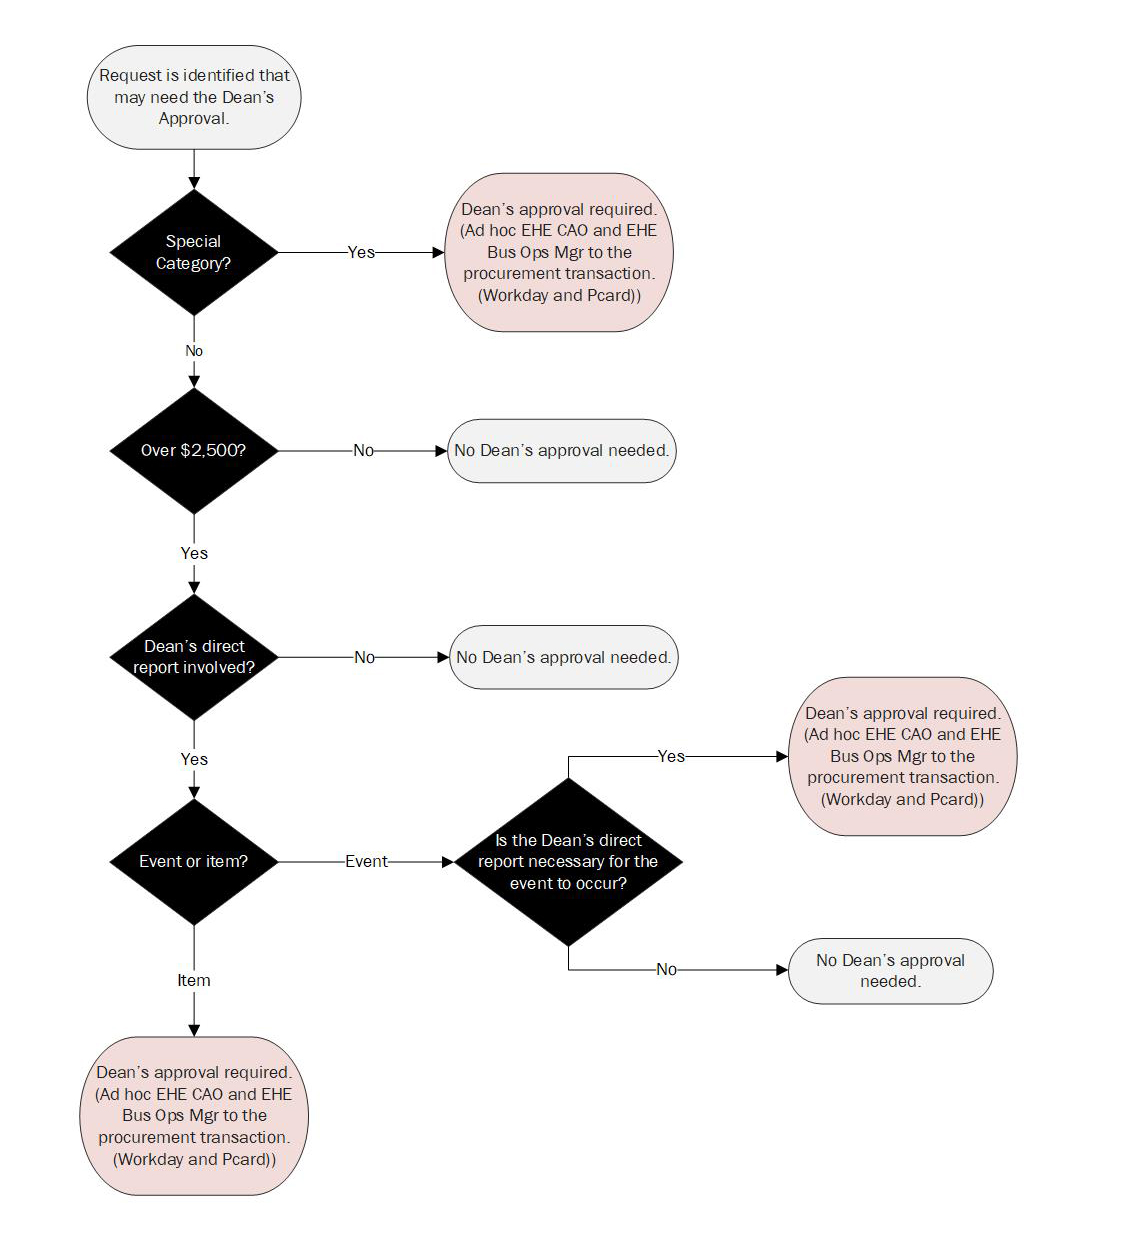 Dean's approval decision tree